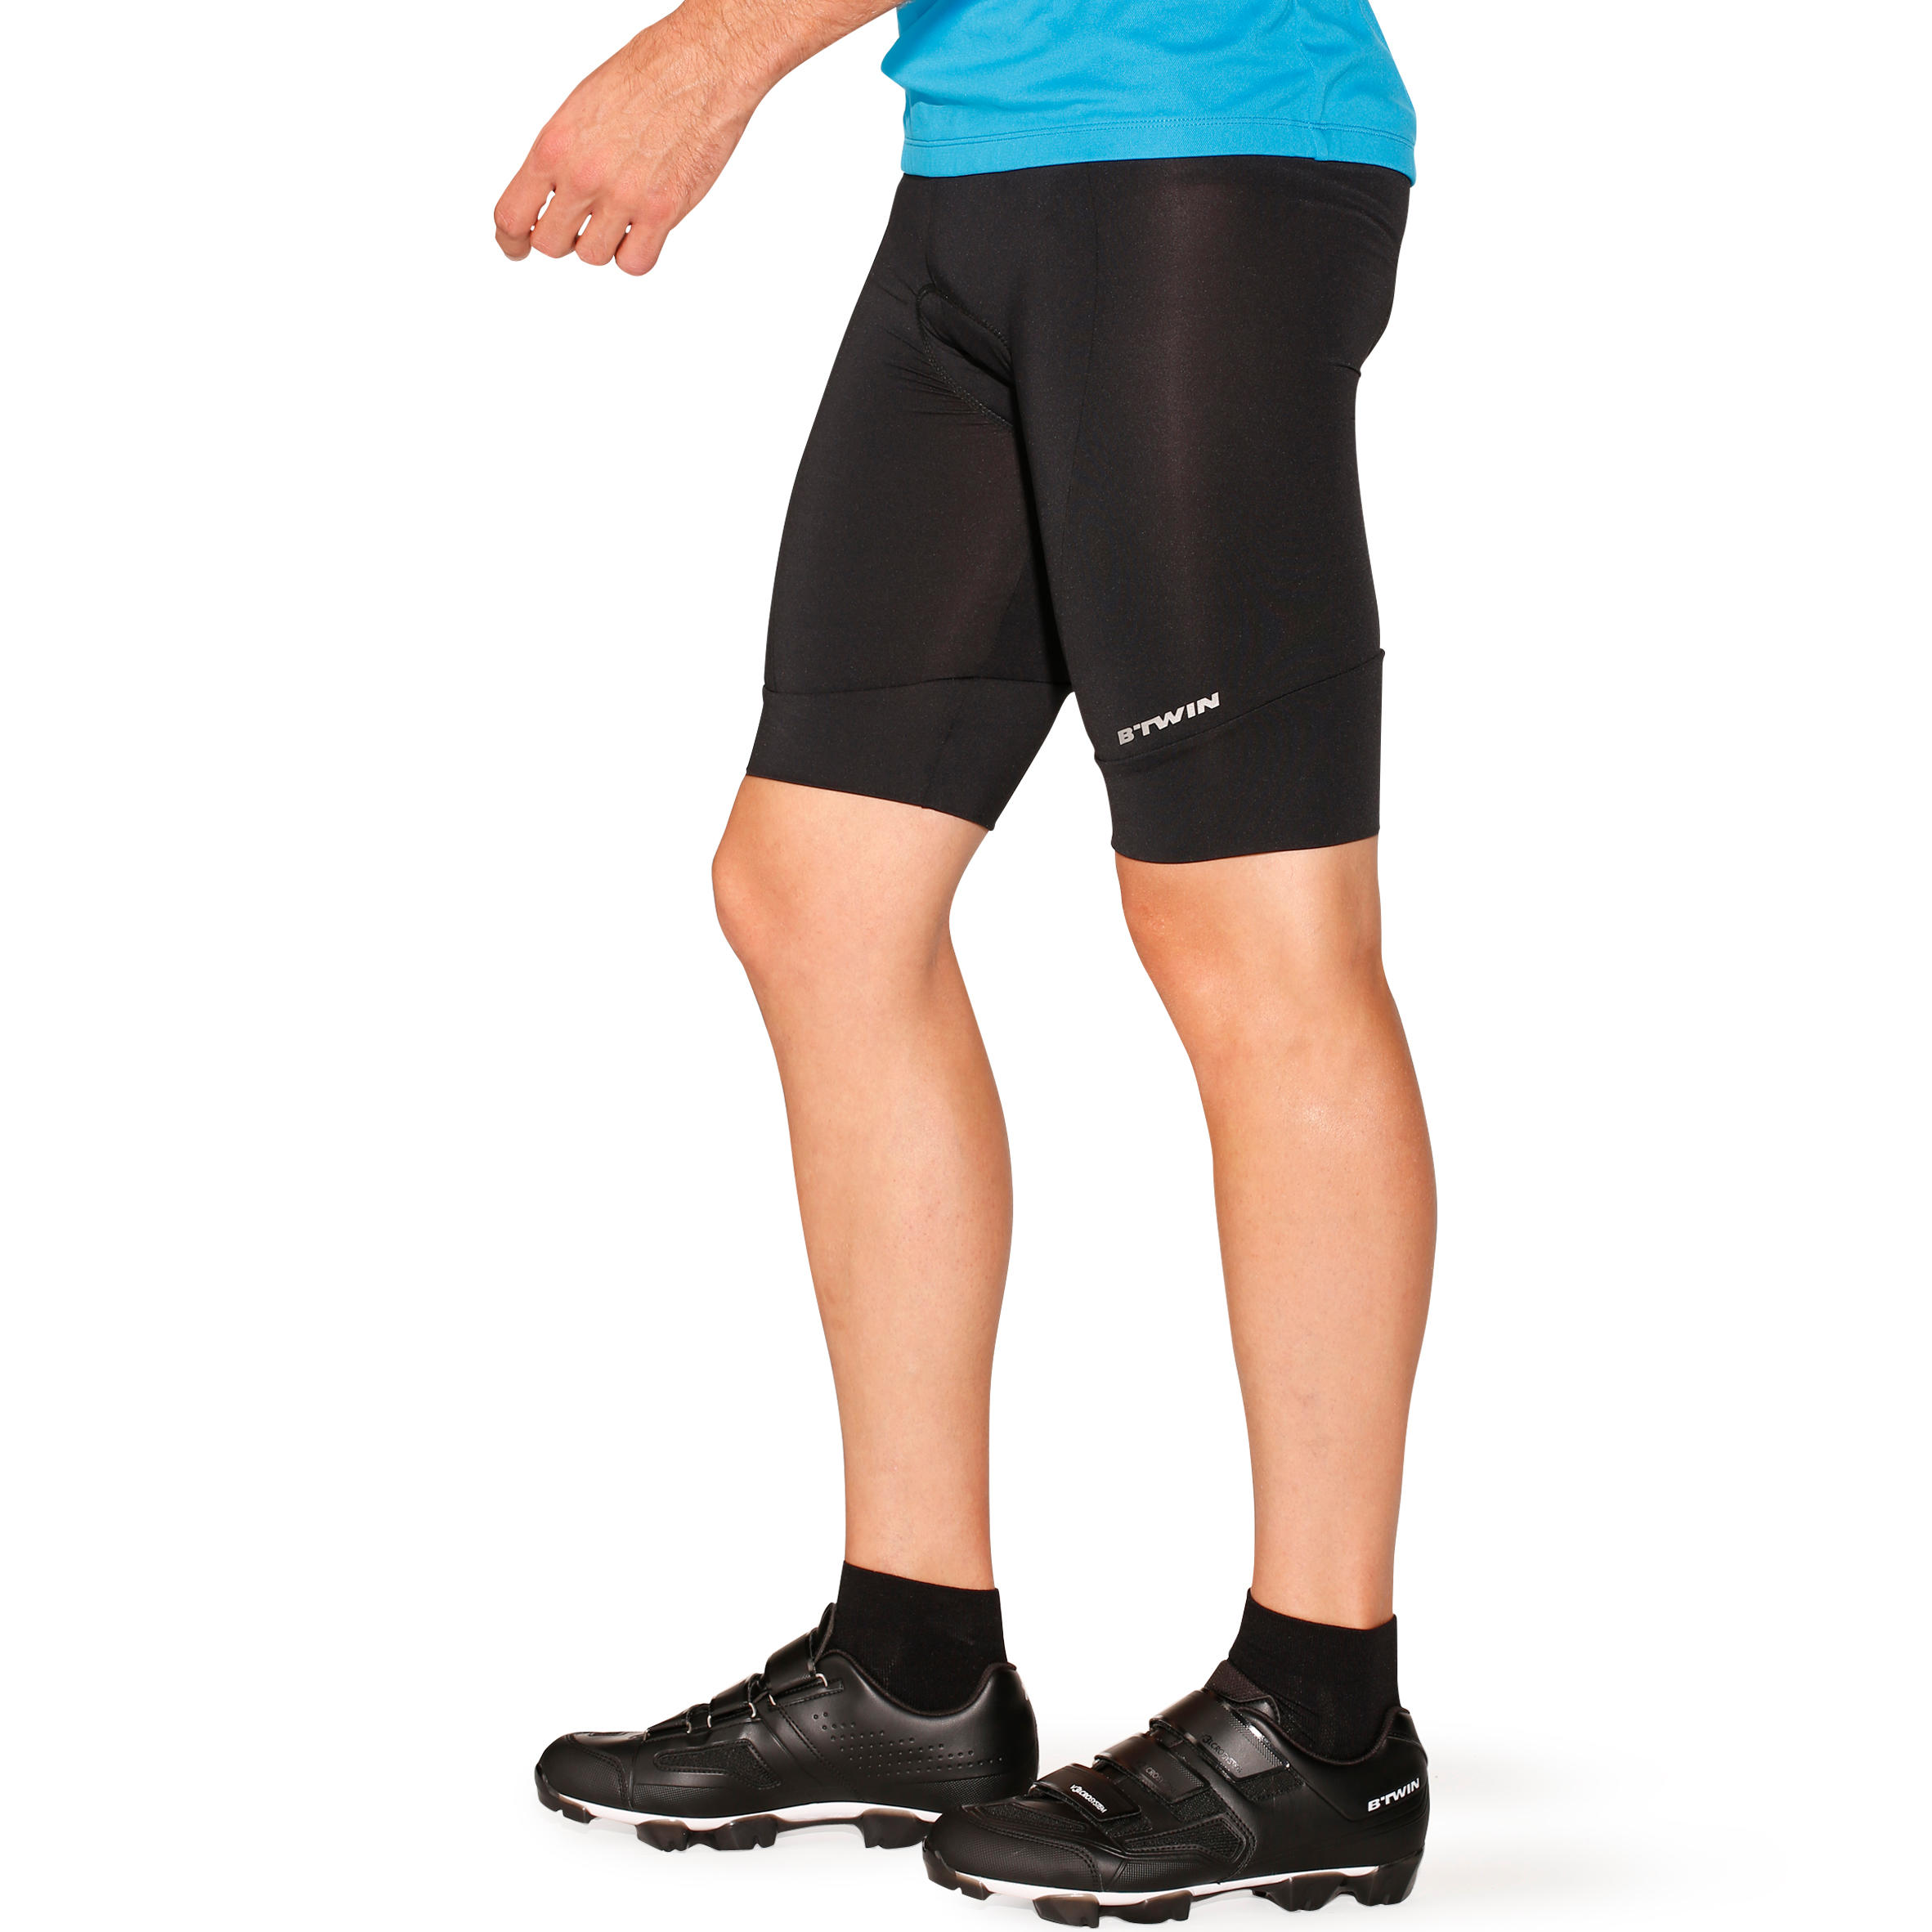 Essential Bibless Road Cycling Shorts - Black 8/11